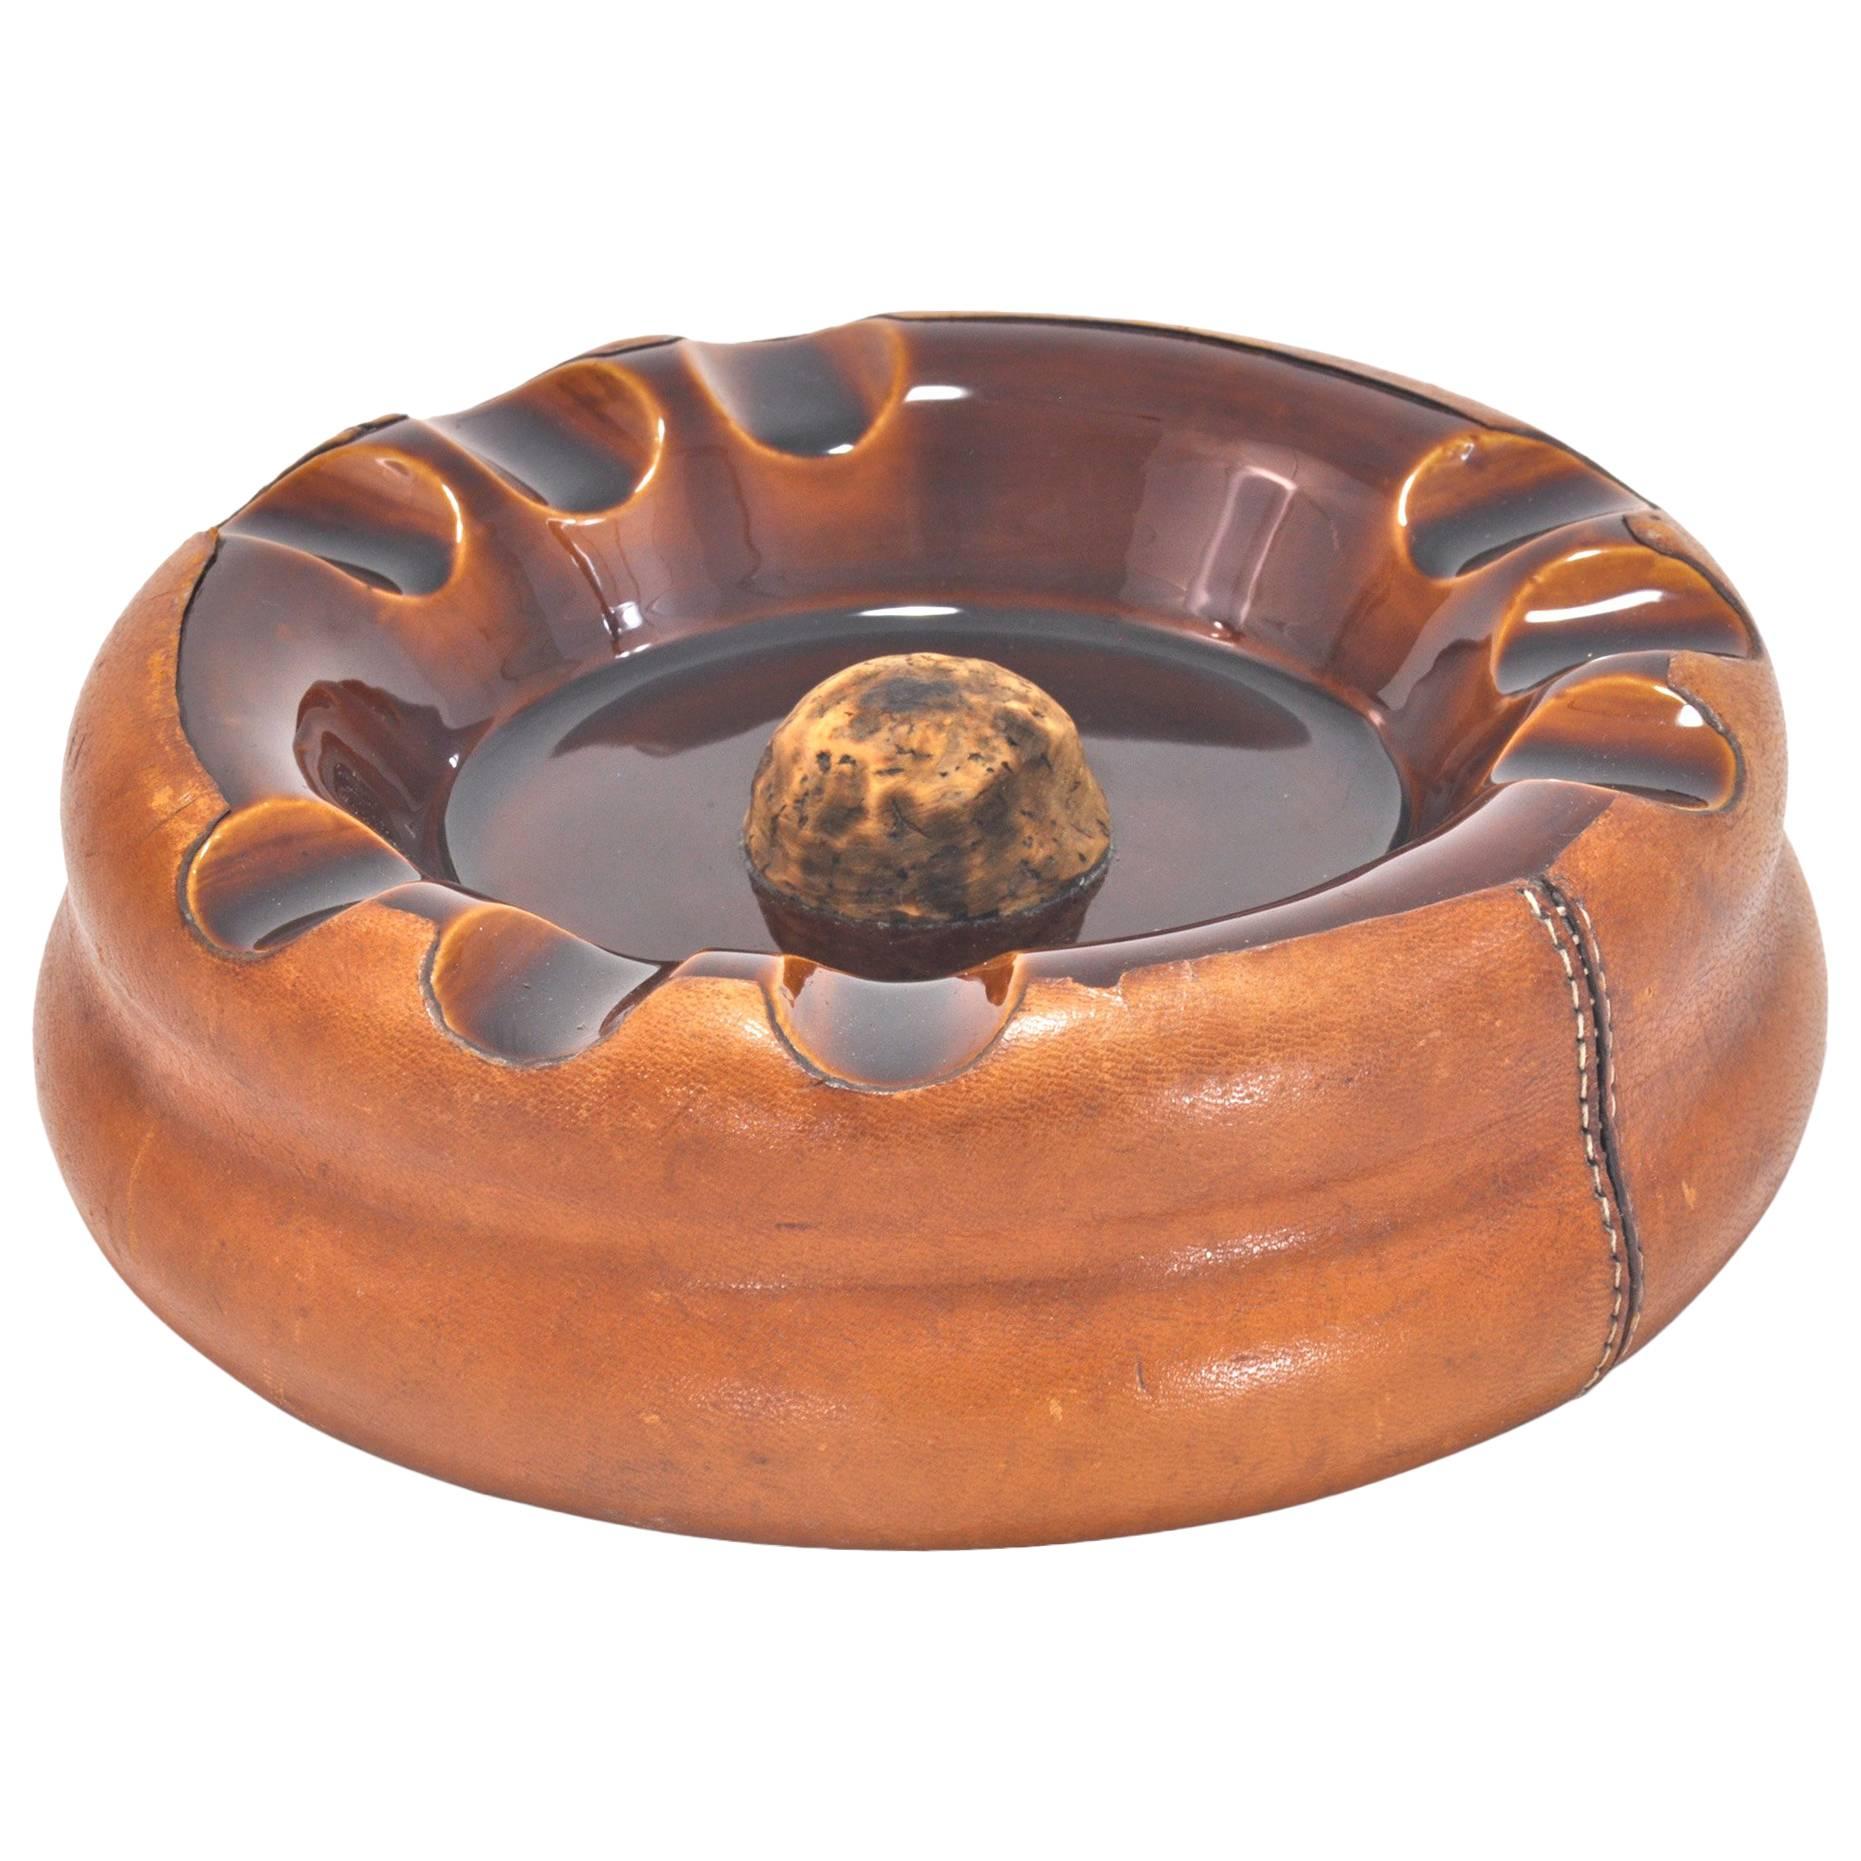 Large Ashtray in Ceramic and Leather by Longchamp Vintage